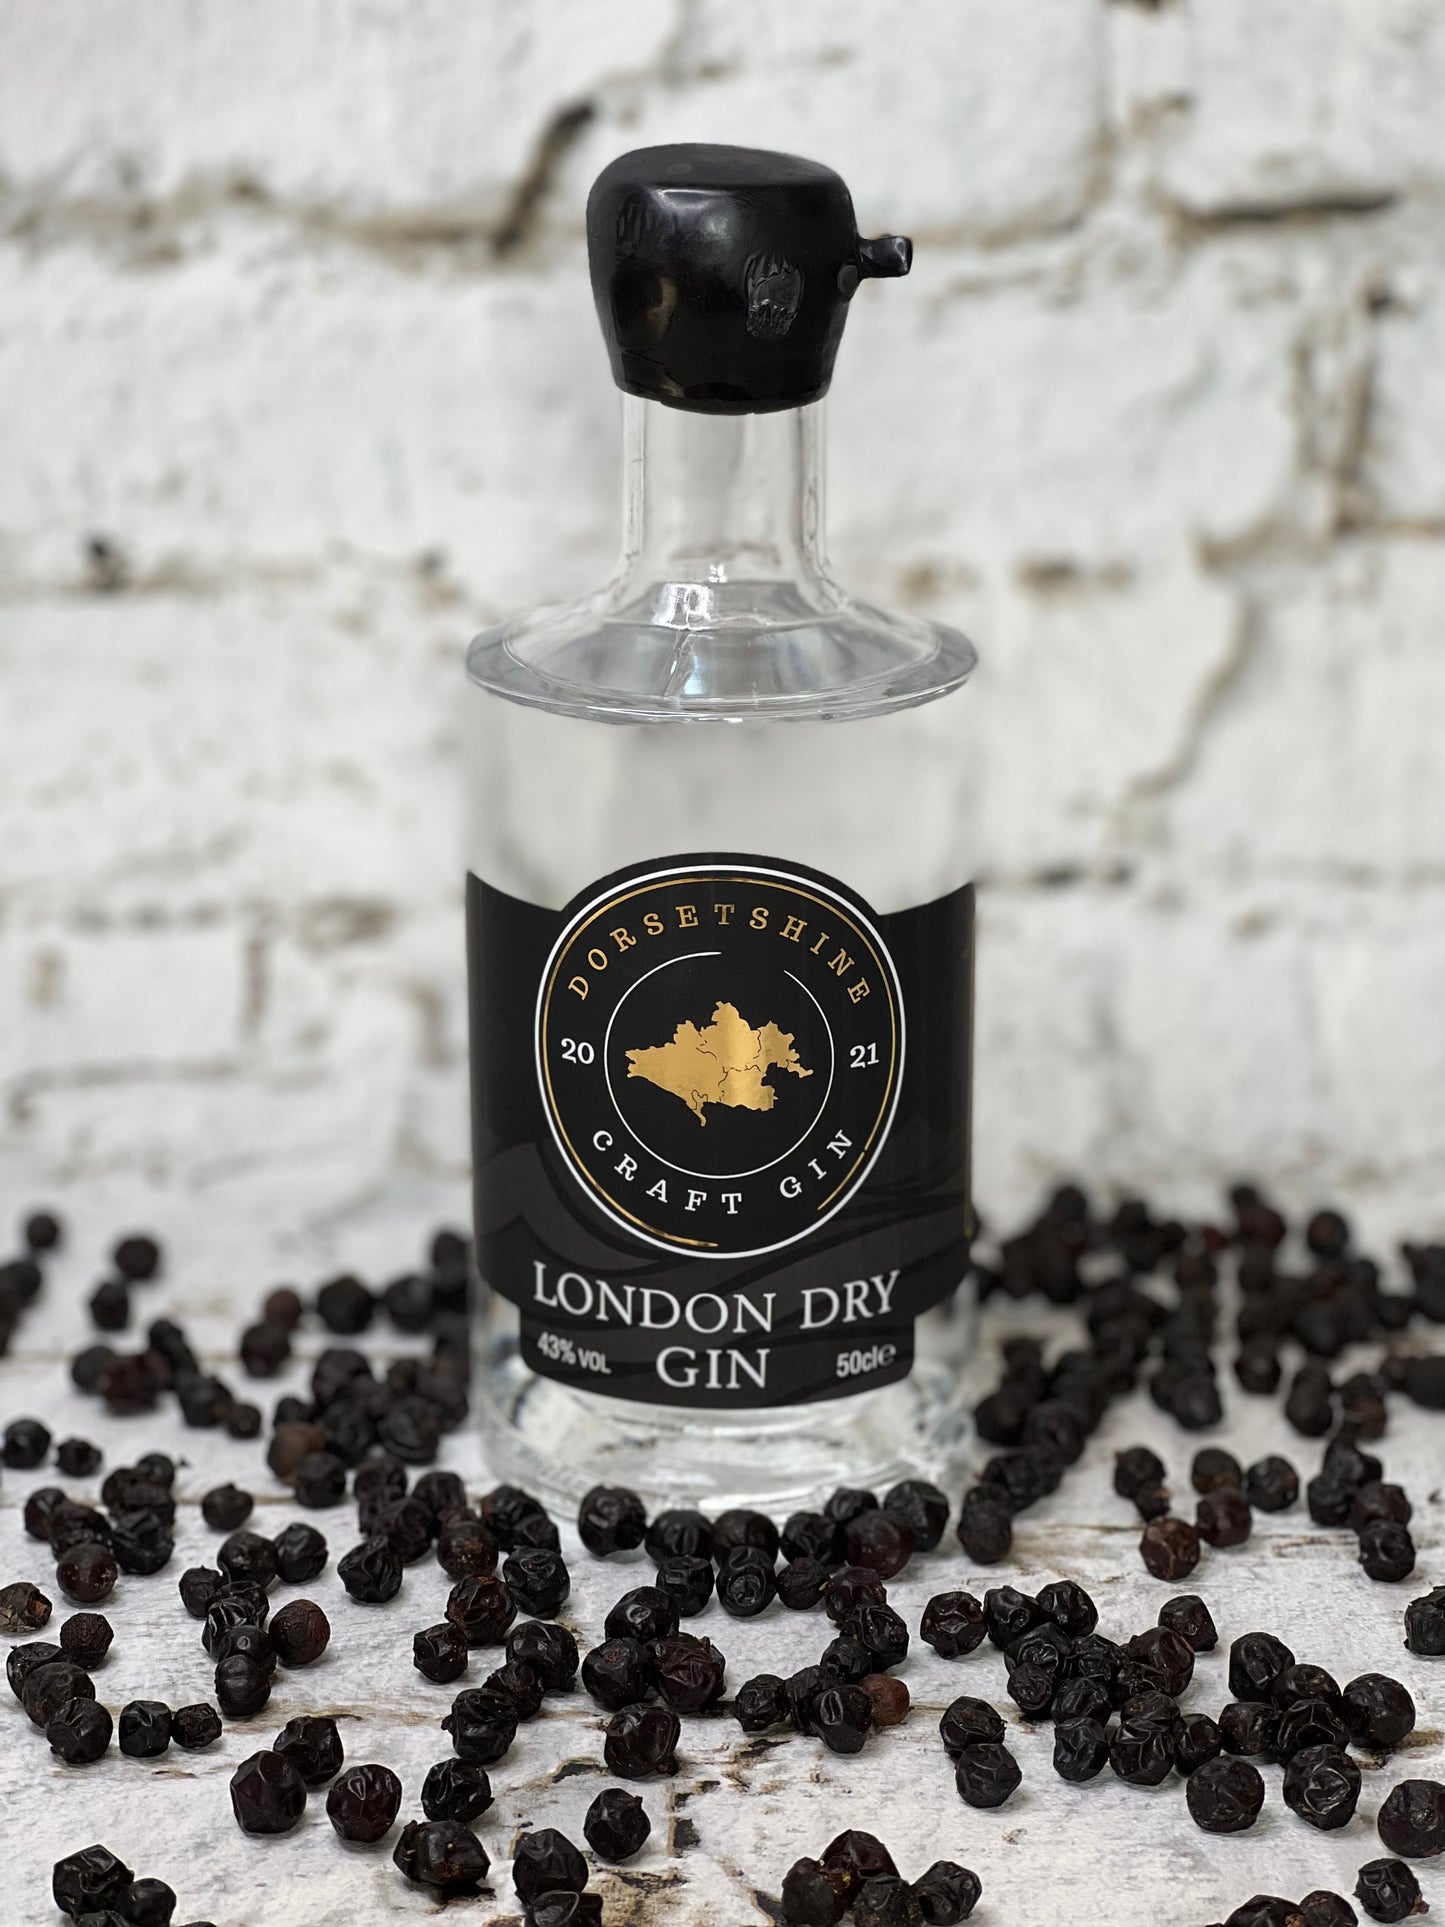 50cl London dry gin